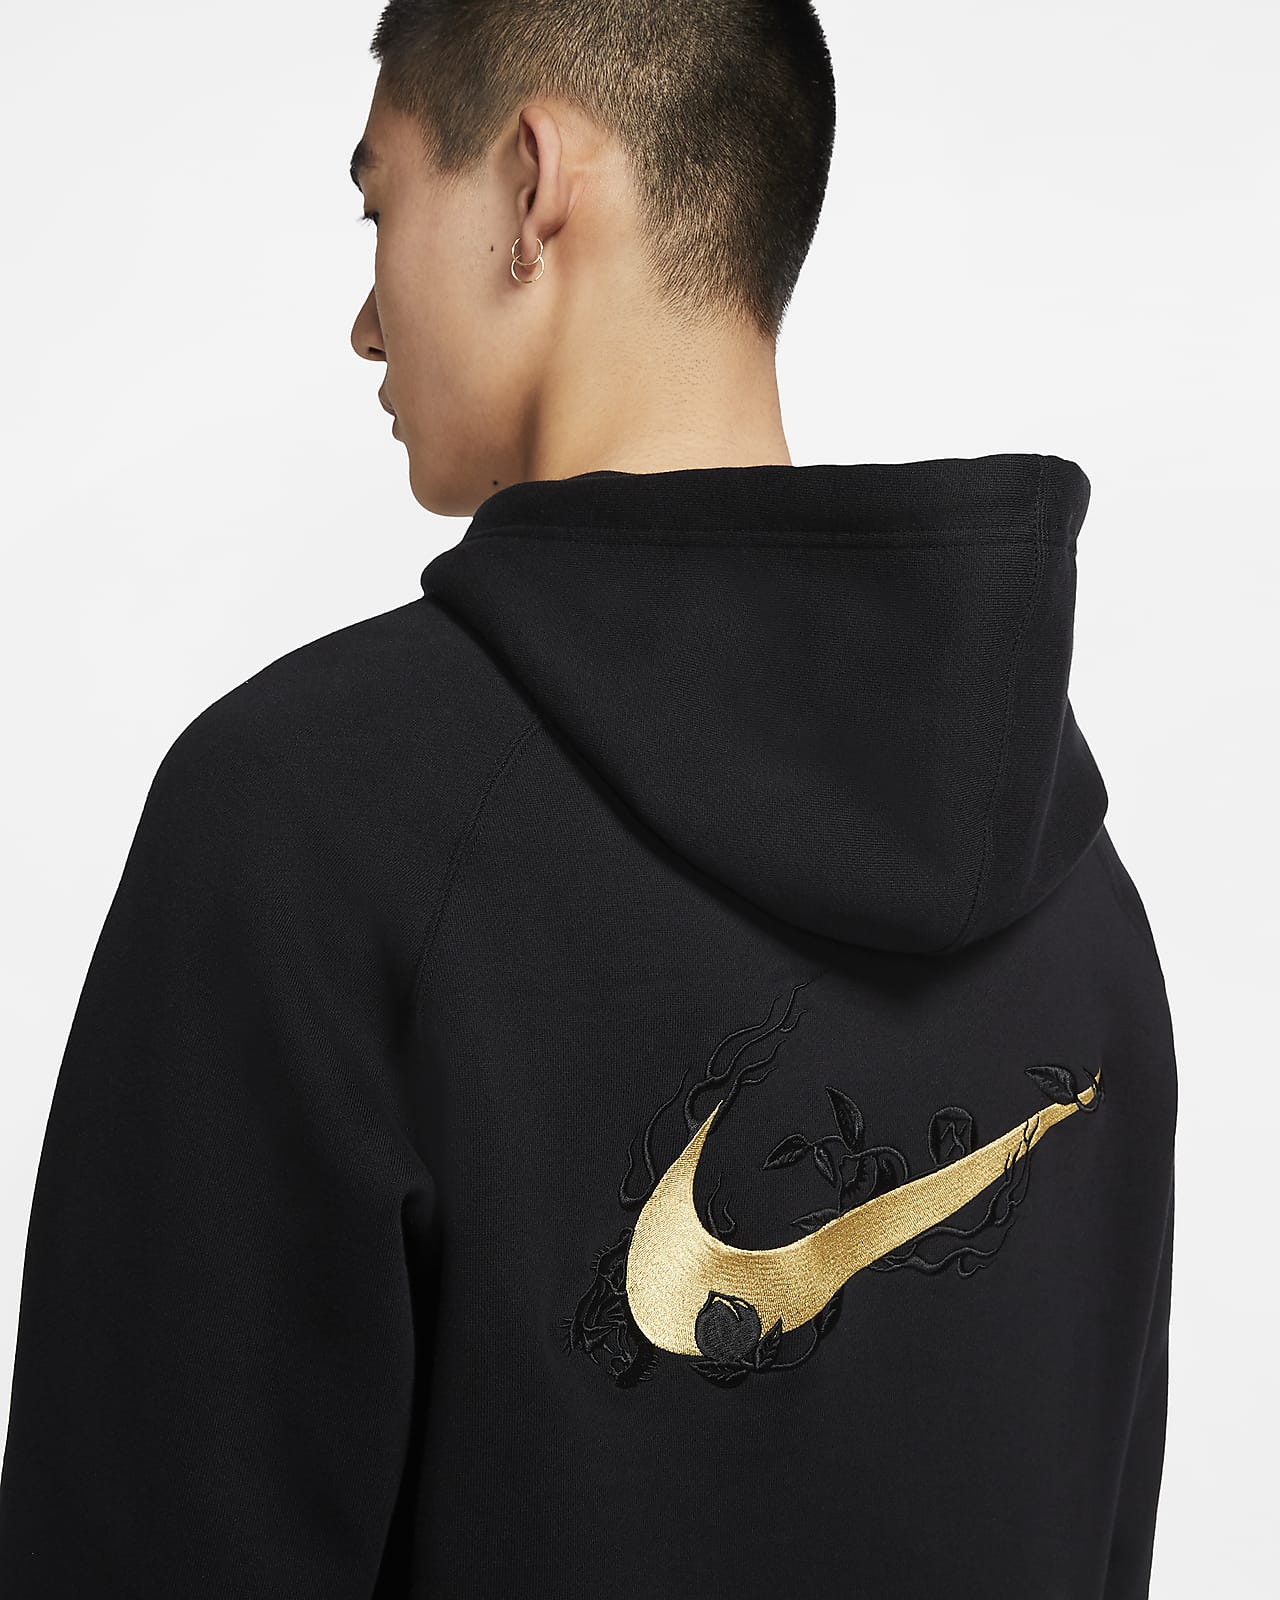 new nike pullover